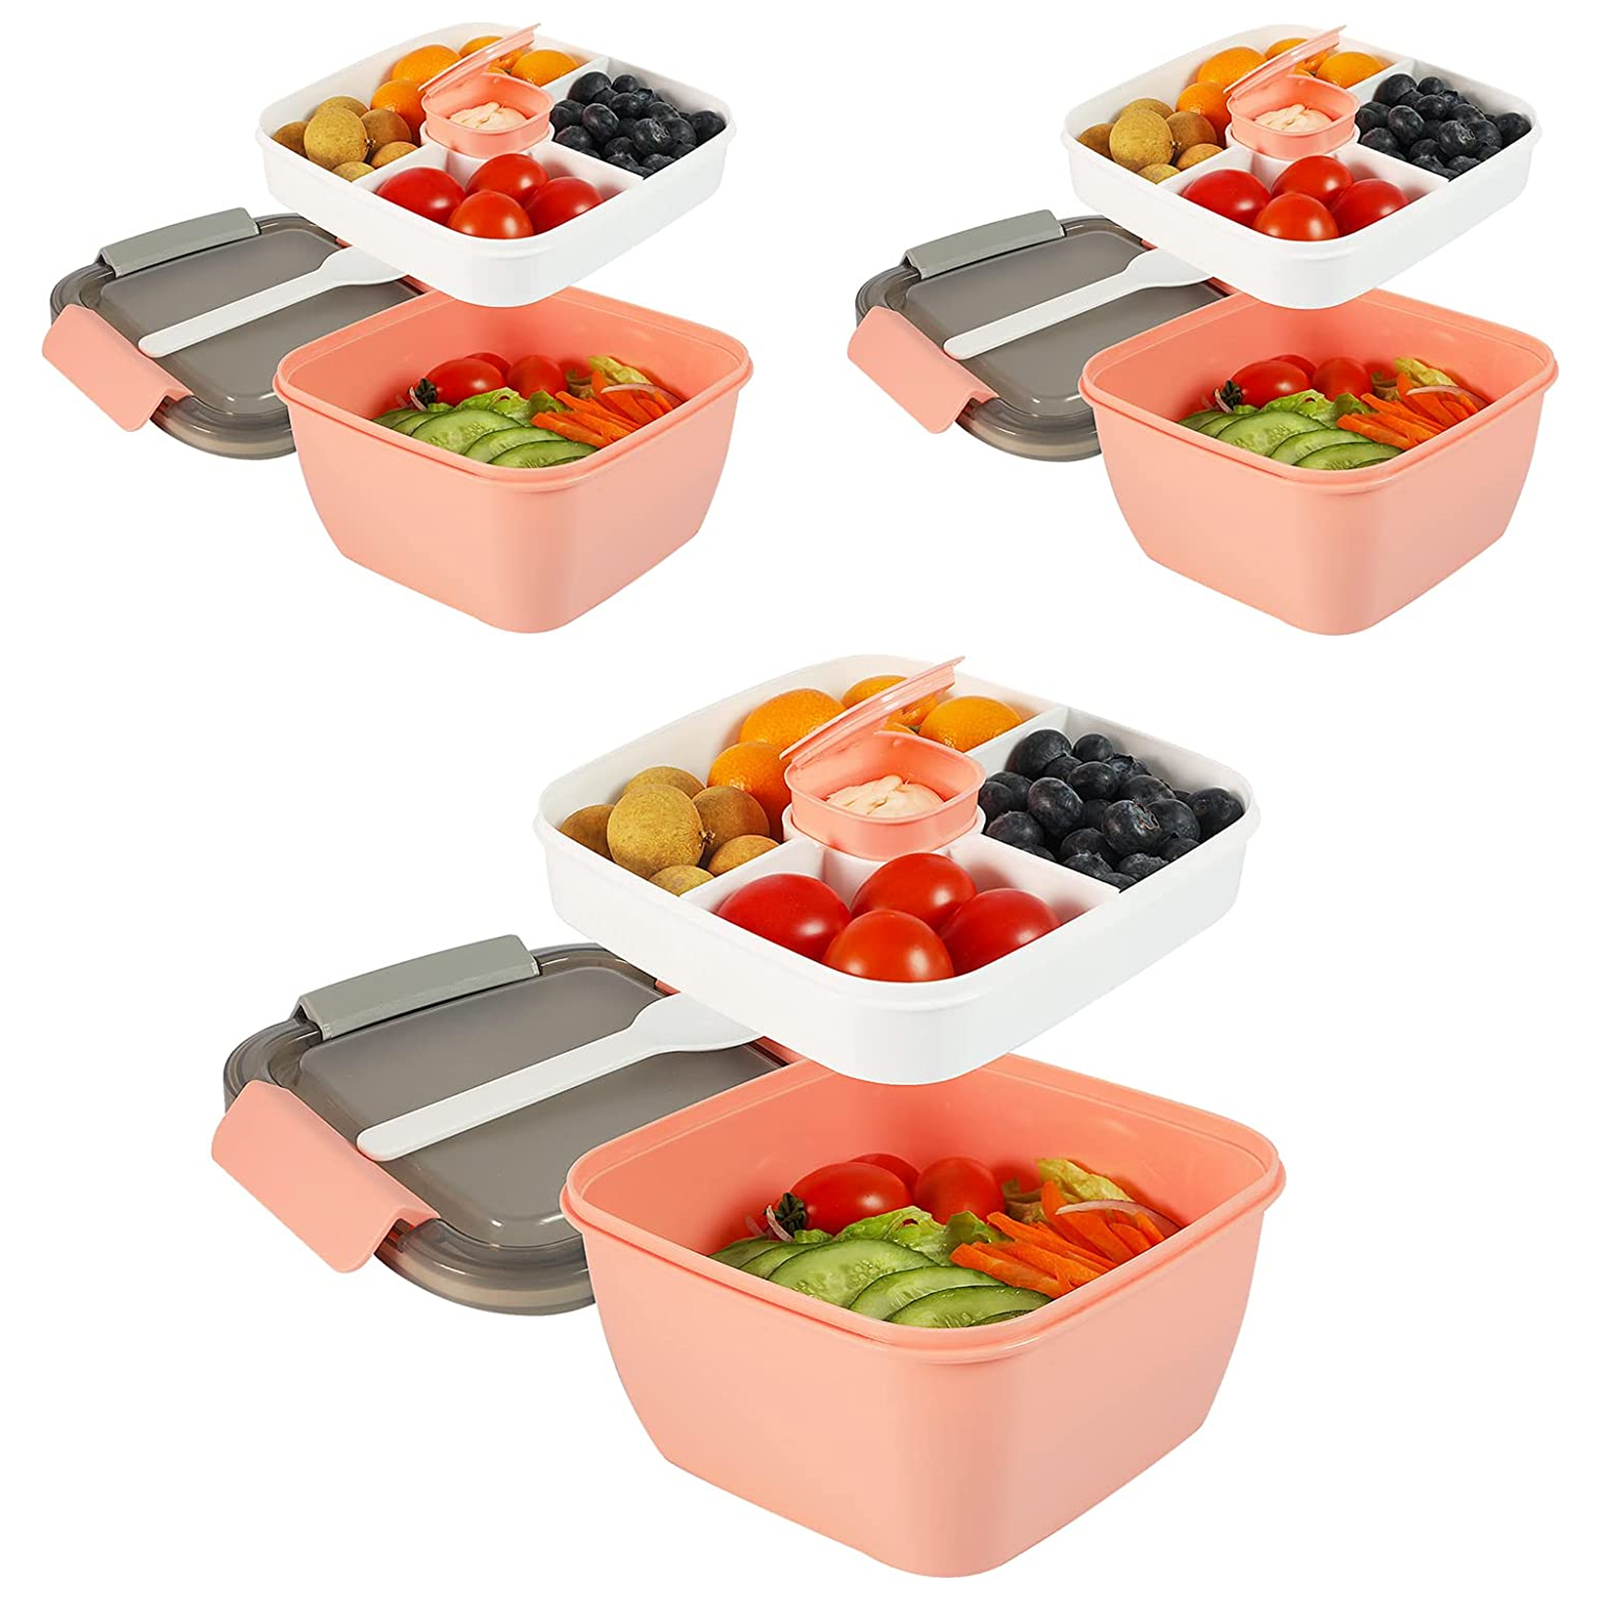 Salad Lunch Container To Go, 52-oz Salad Bowls With 3 Compartments